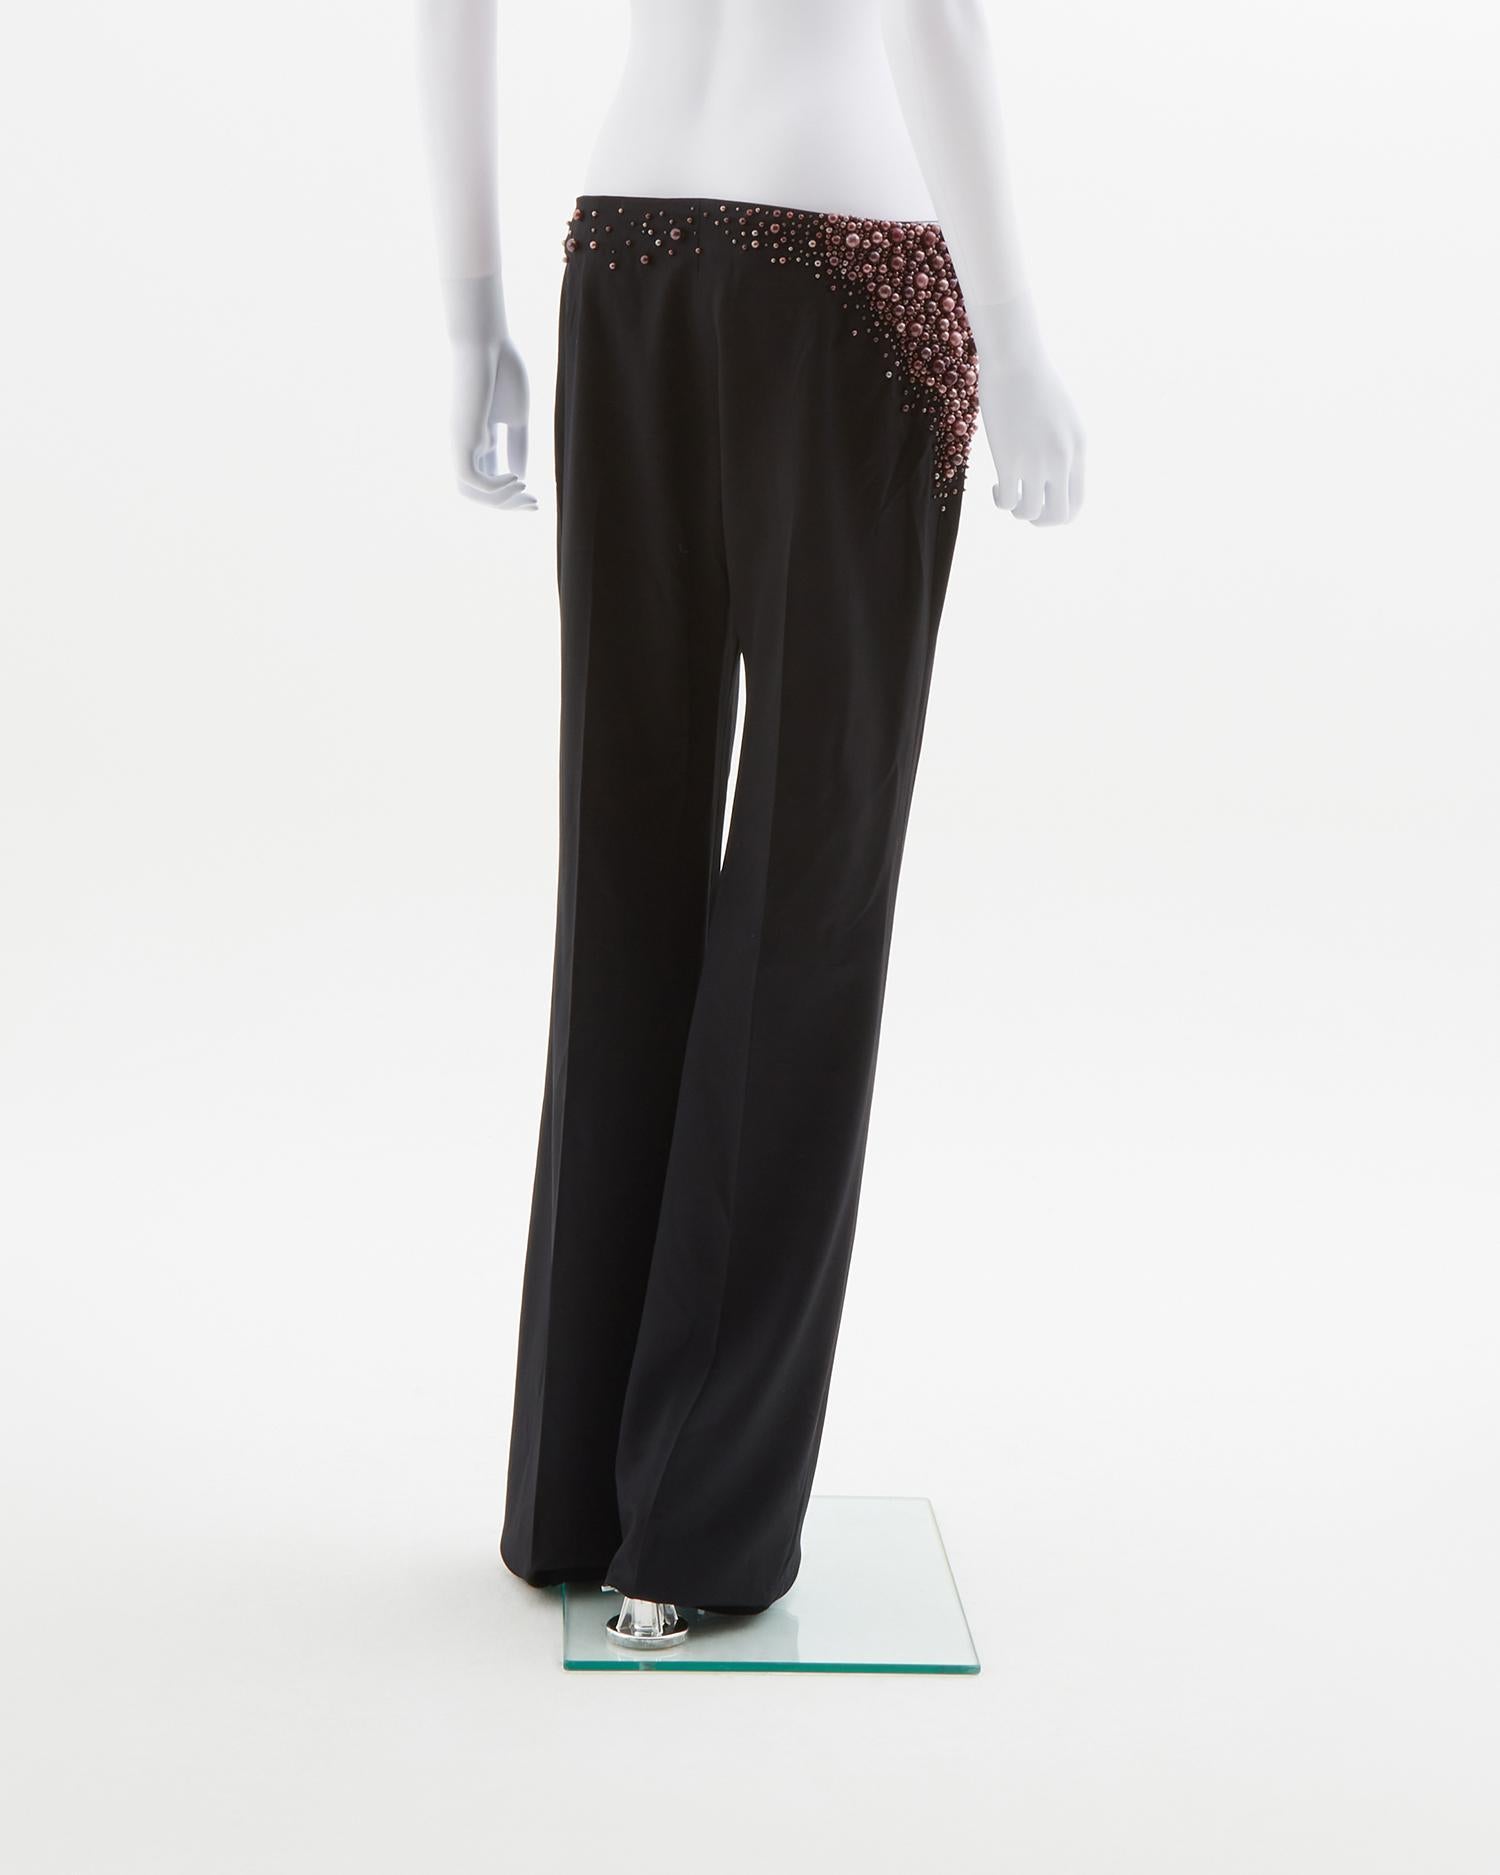 - Chloè designed by Stella McCartney 
- Sold by Skof.Archive
- Fall Winter 2001
- Long wide leg 
- Heavily embellished at right hip
- Purple metallic ball shaped appliques on hip with others scattered throughout waistband 
- Lightweight wool blend